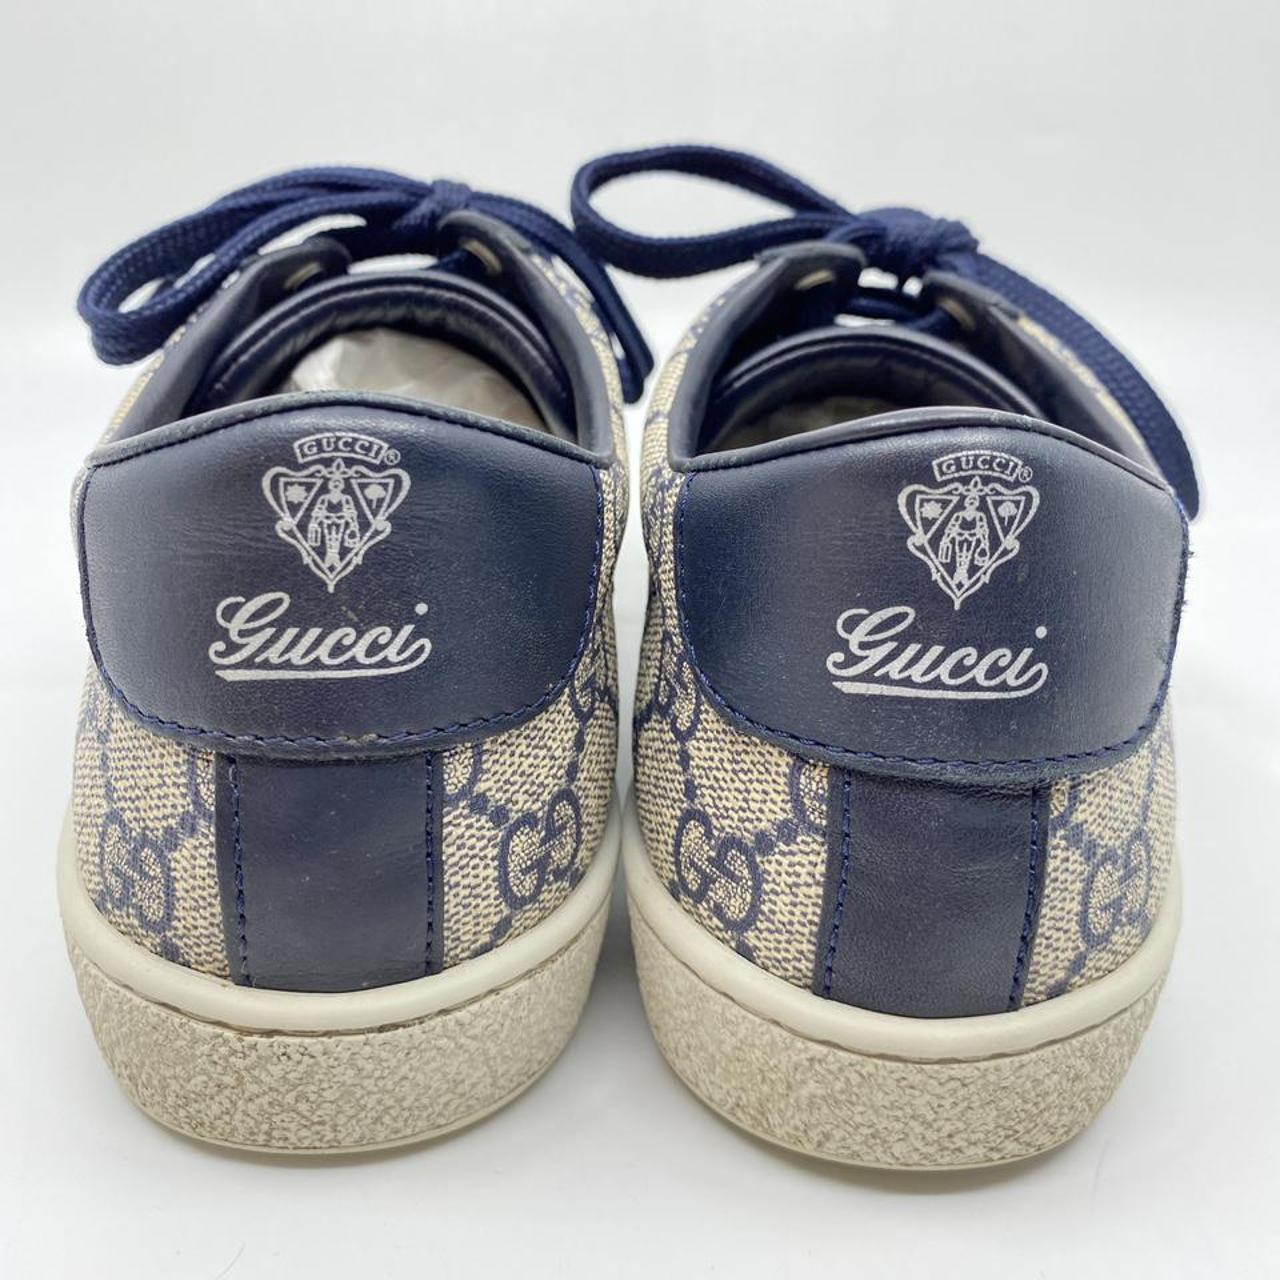 Gucci Women's Cream and Navy Trainers (3)